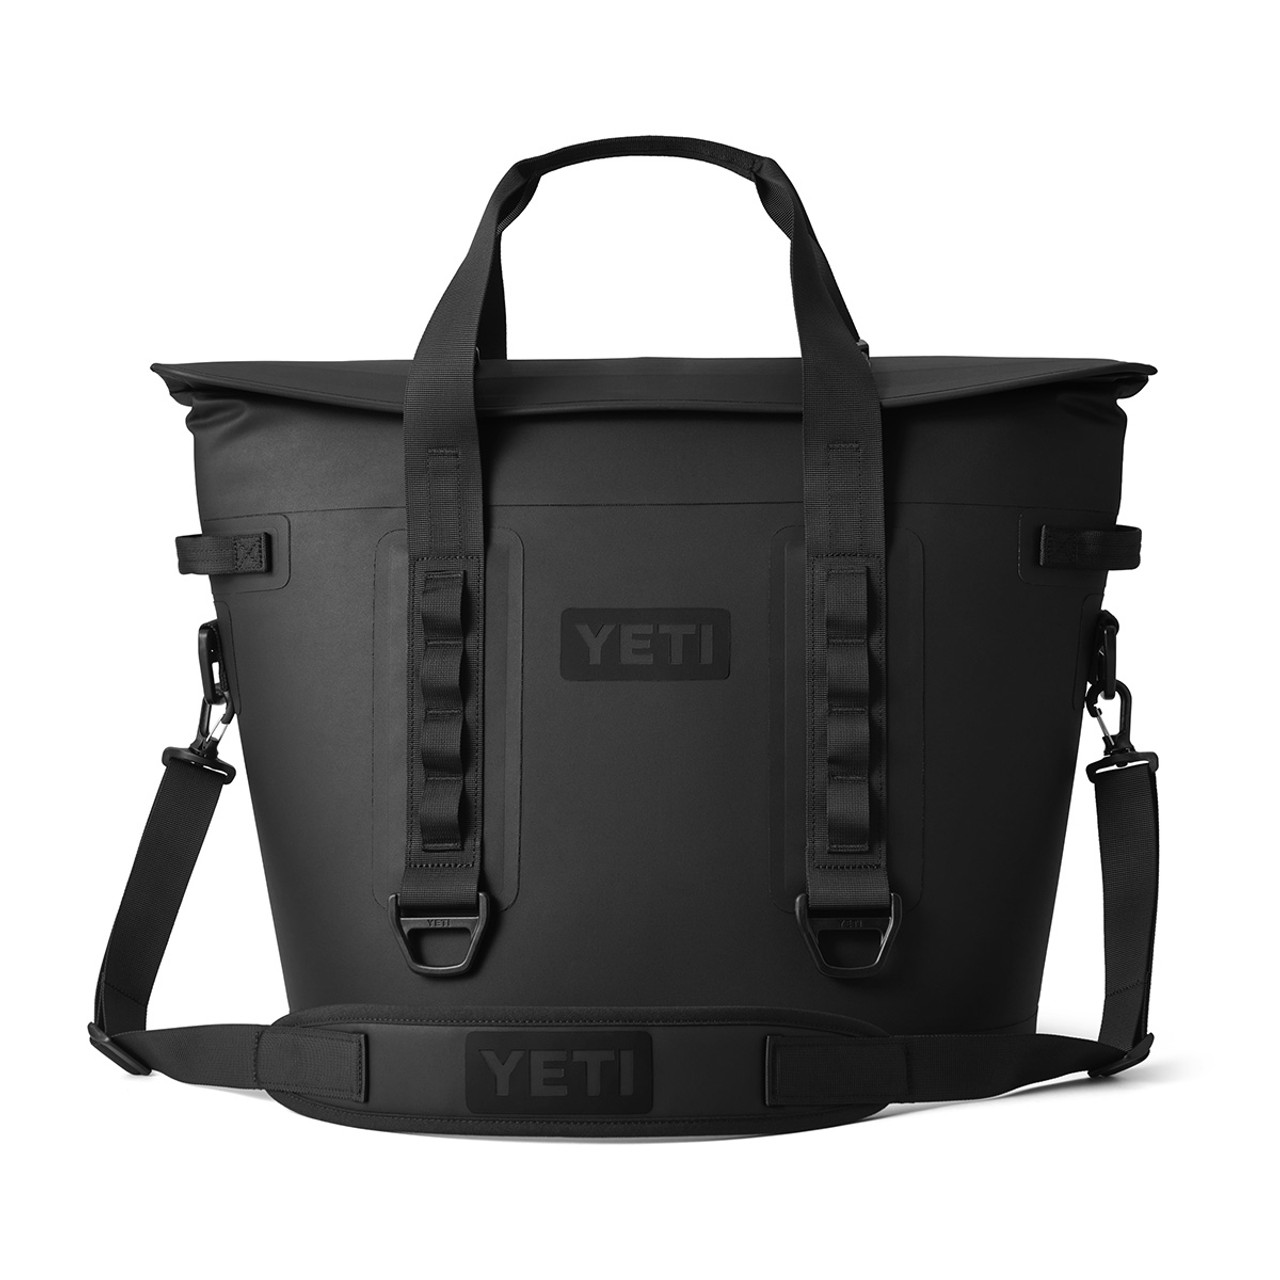 Black coolers & bags! Excited? : r/YetiCoolers